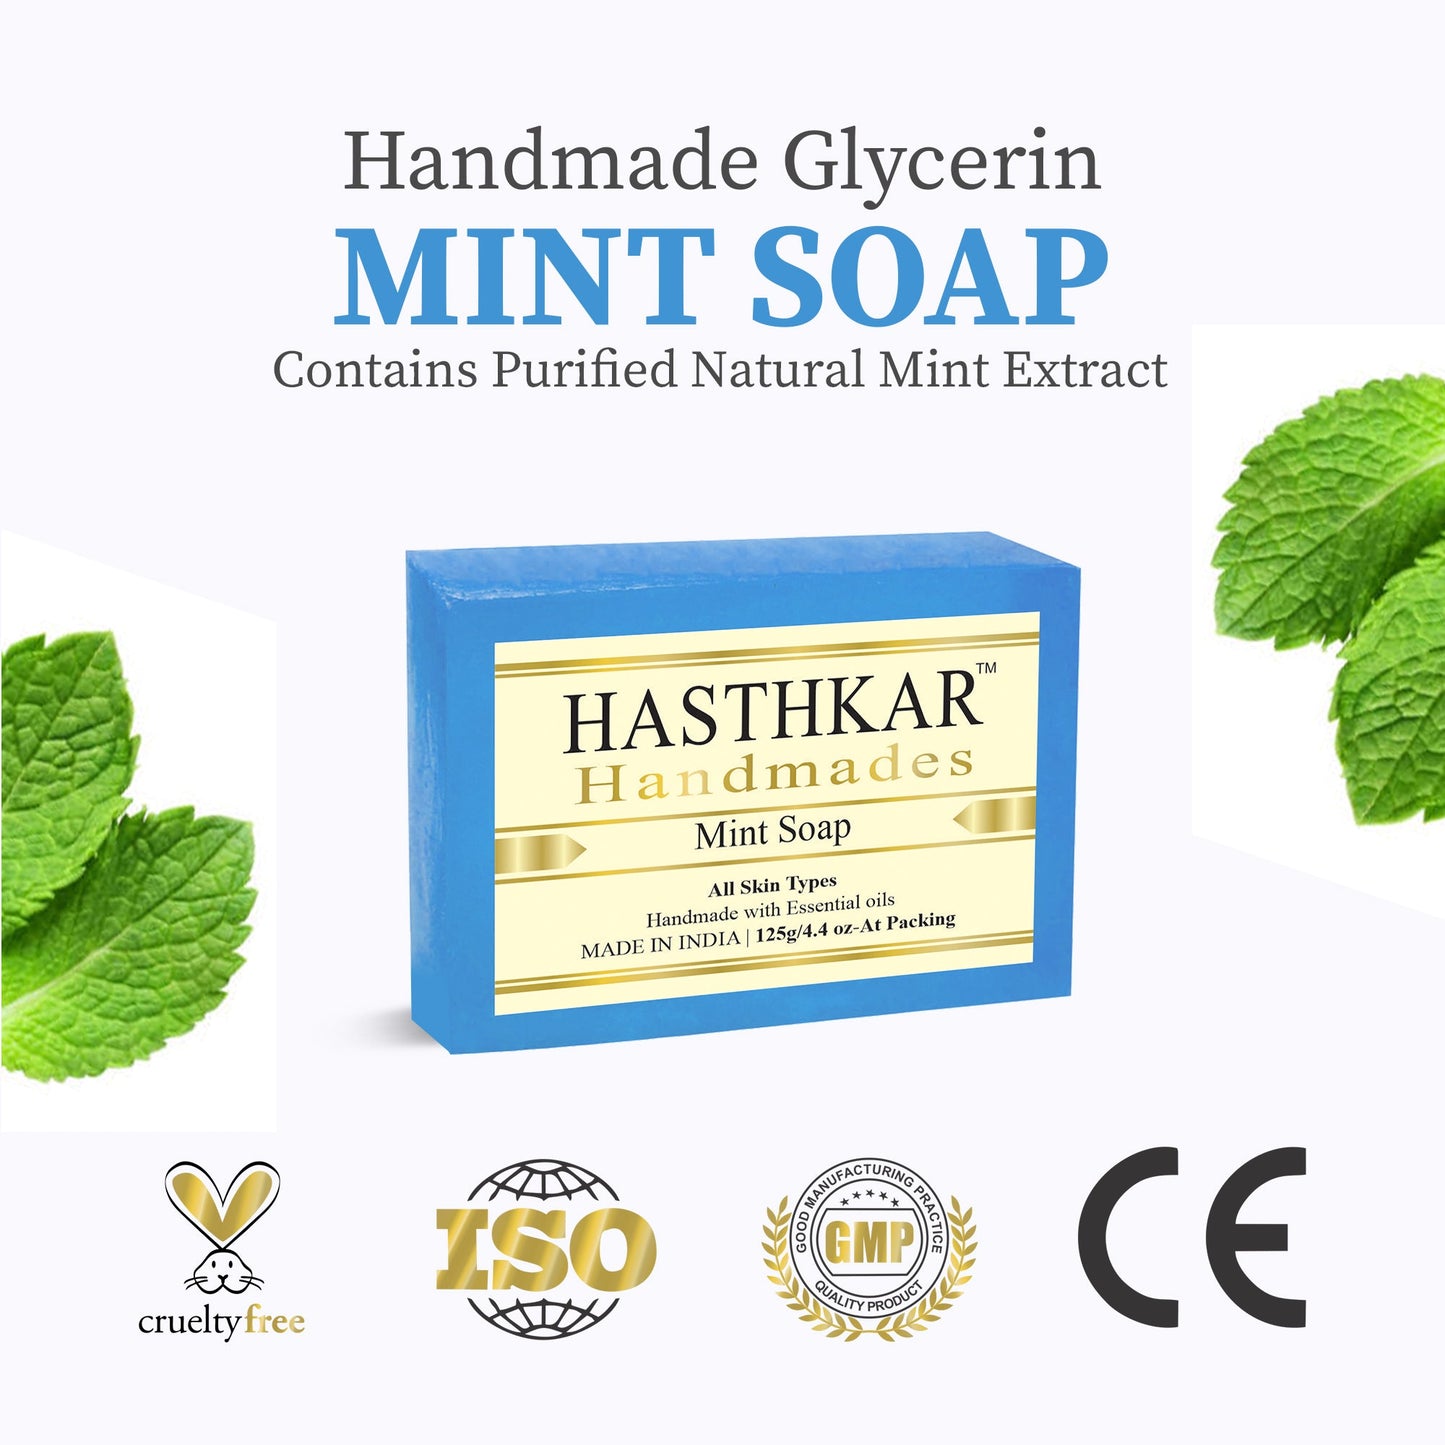 Hasthkar Handmades Glycerine Mint Soap For Reviving Your Skin | Giving You A Refreshed And Energetic Look | Exfoliates Your Skin | Making It Smooth And Soft - 125Gm